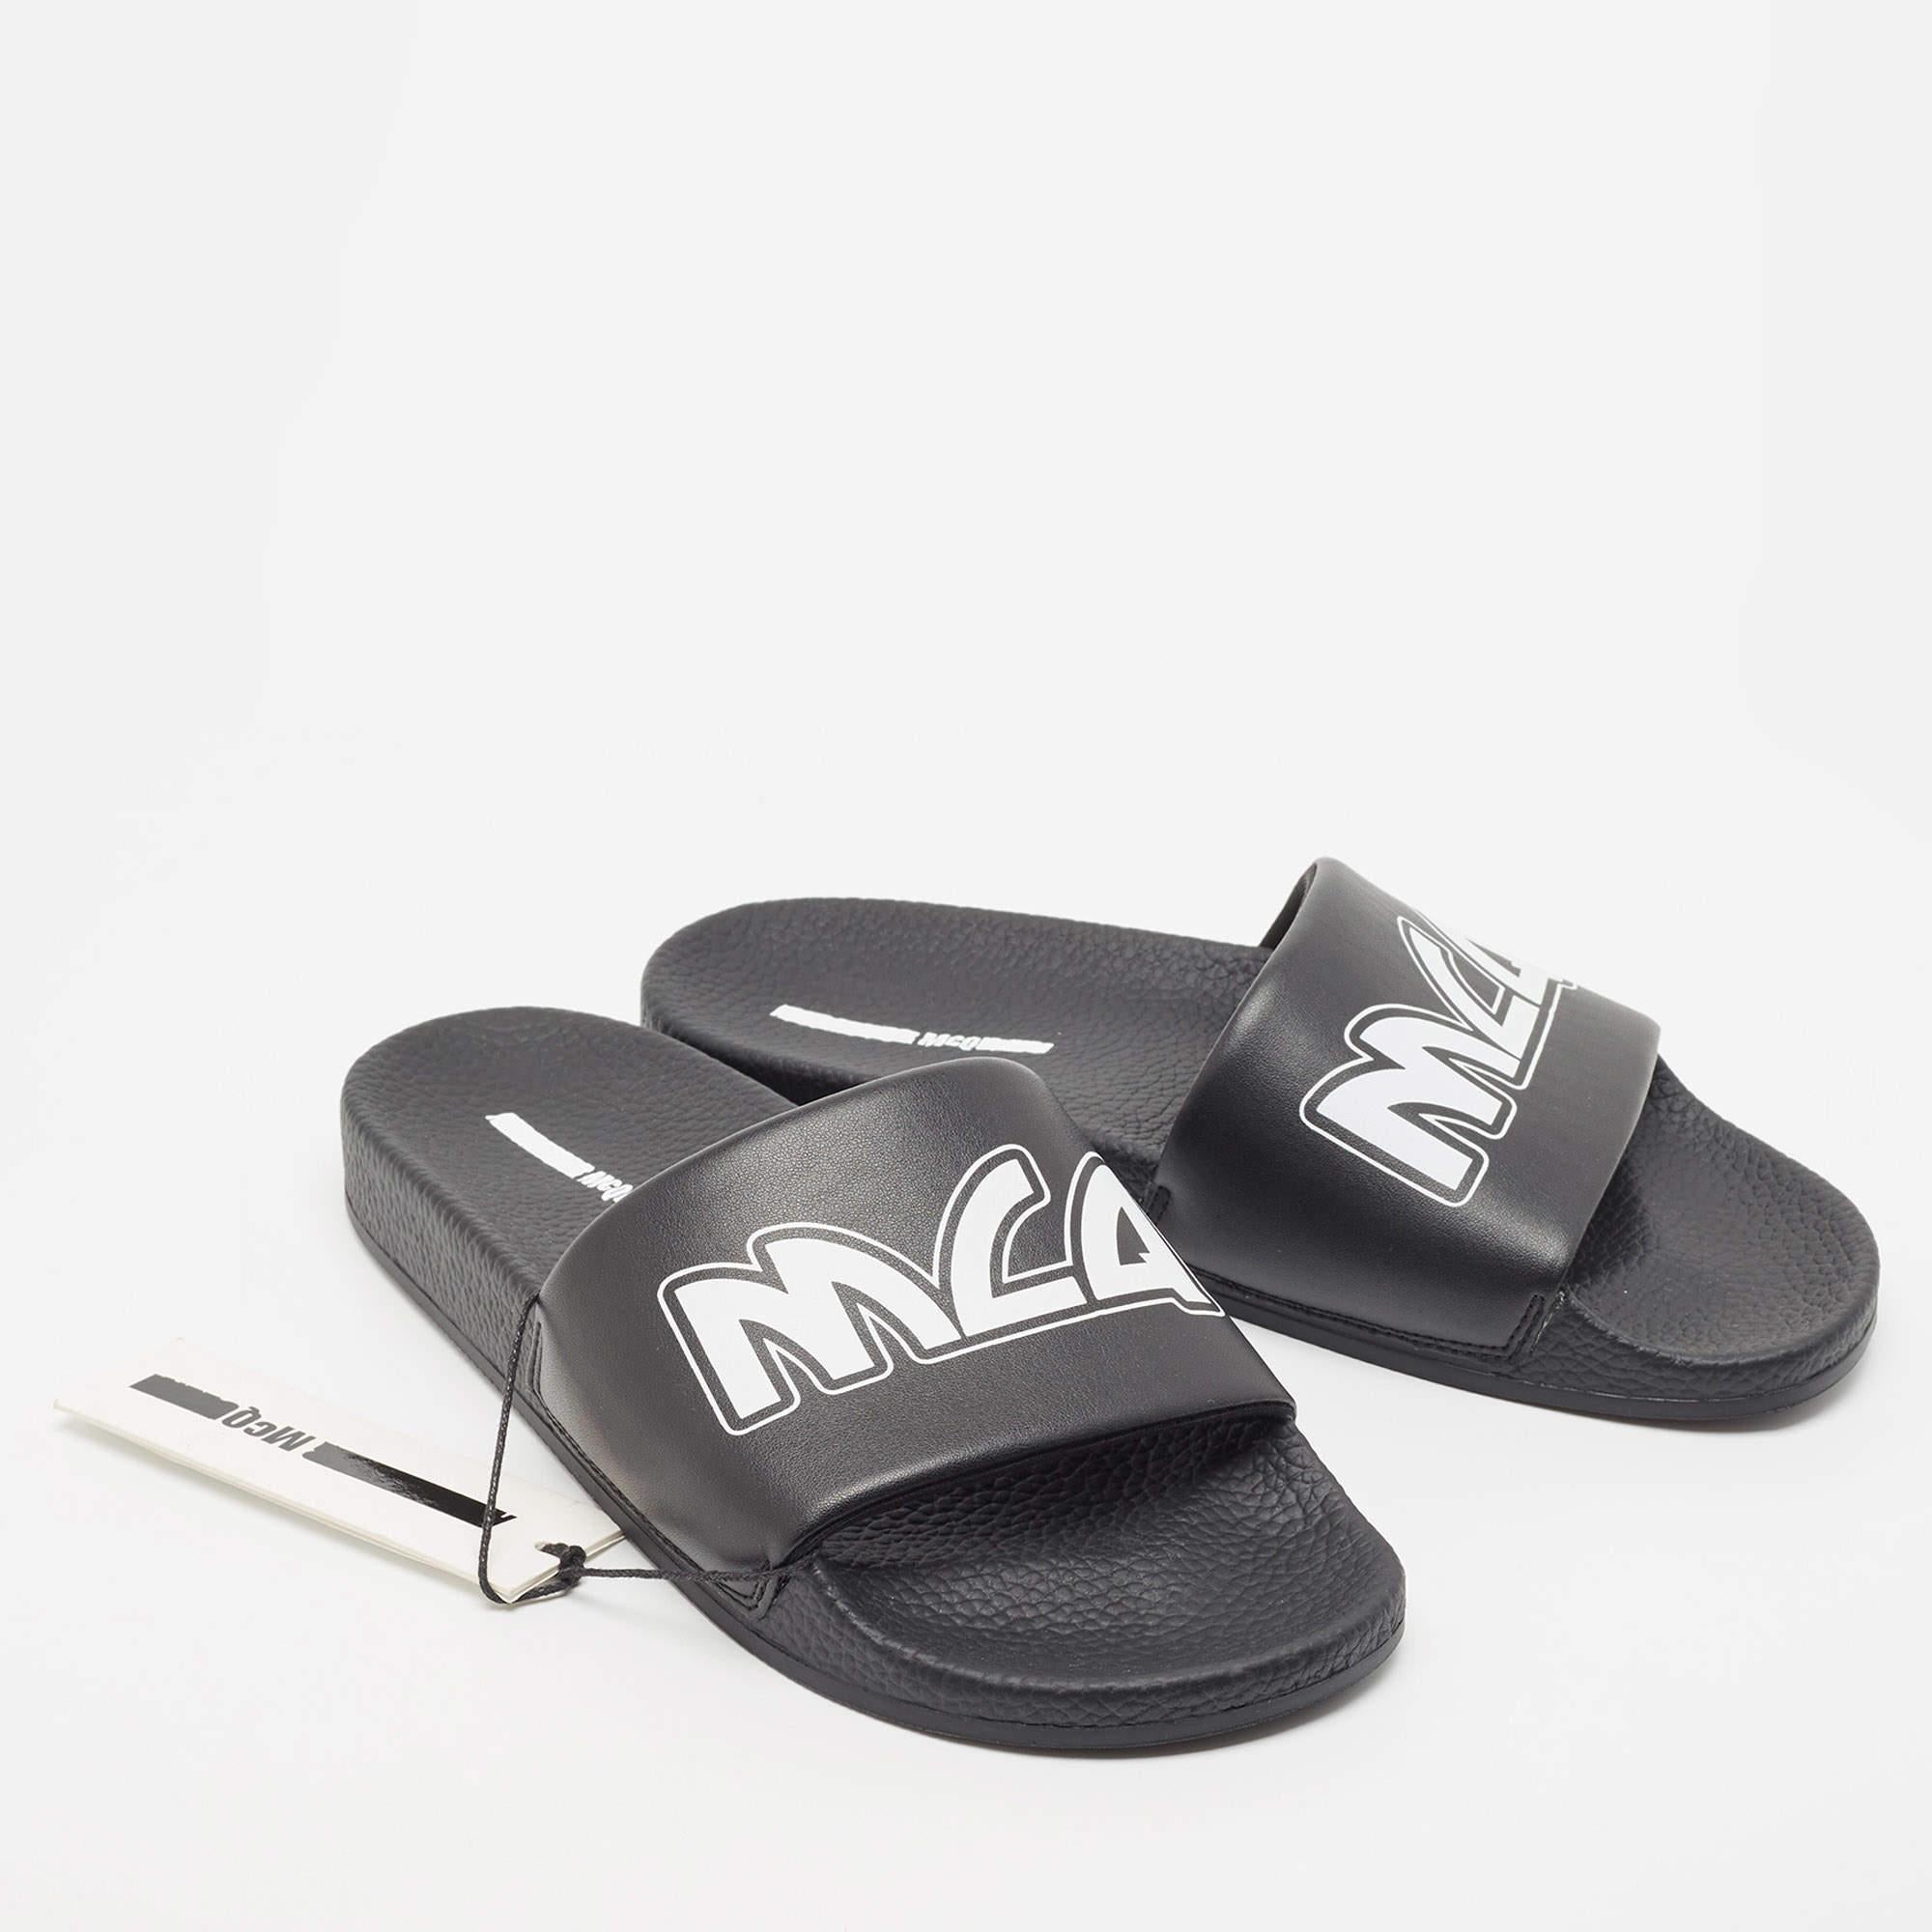 McQ by Alexander McQueen Black Leather and Rubber Logo Pool Slides Size 40 In New Condition For Sale In Dubai, Al Qouz 2